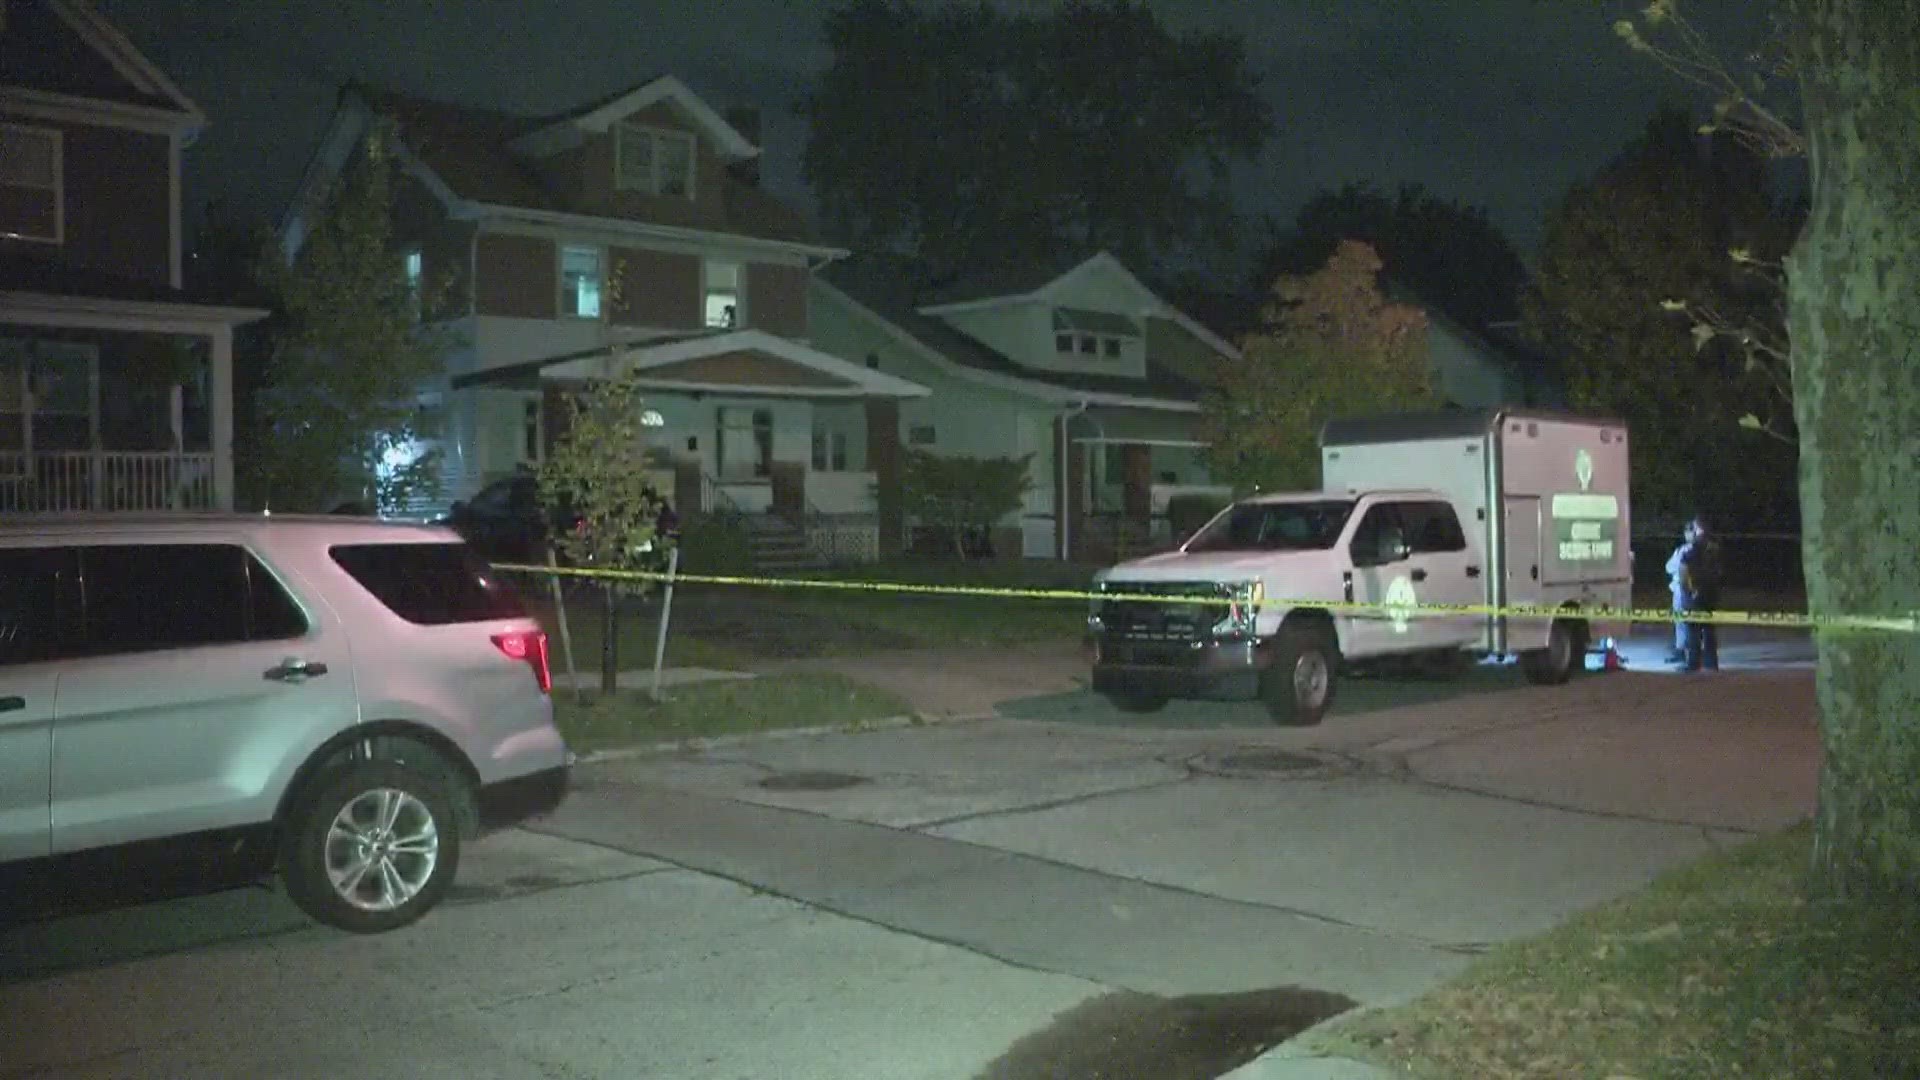 An investigation is underway after 2 are dead following an overnight shooting in Shaker Heights.